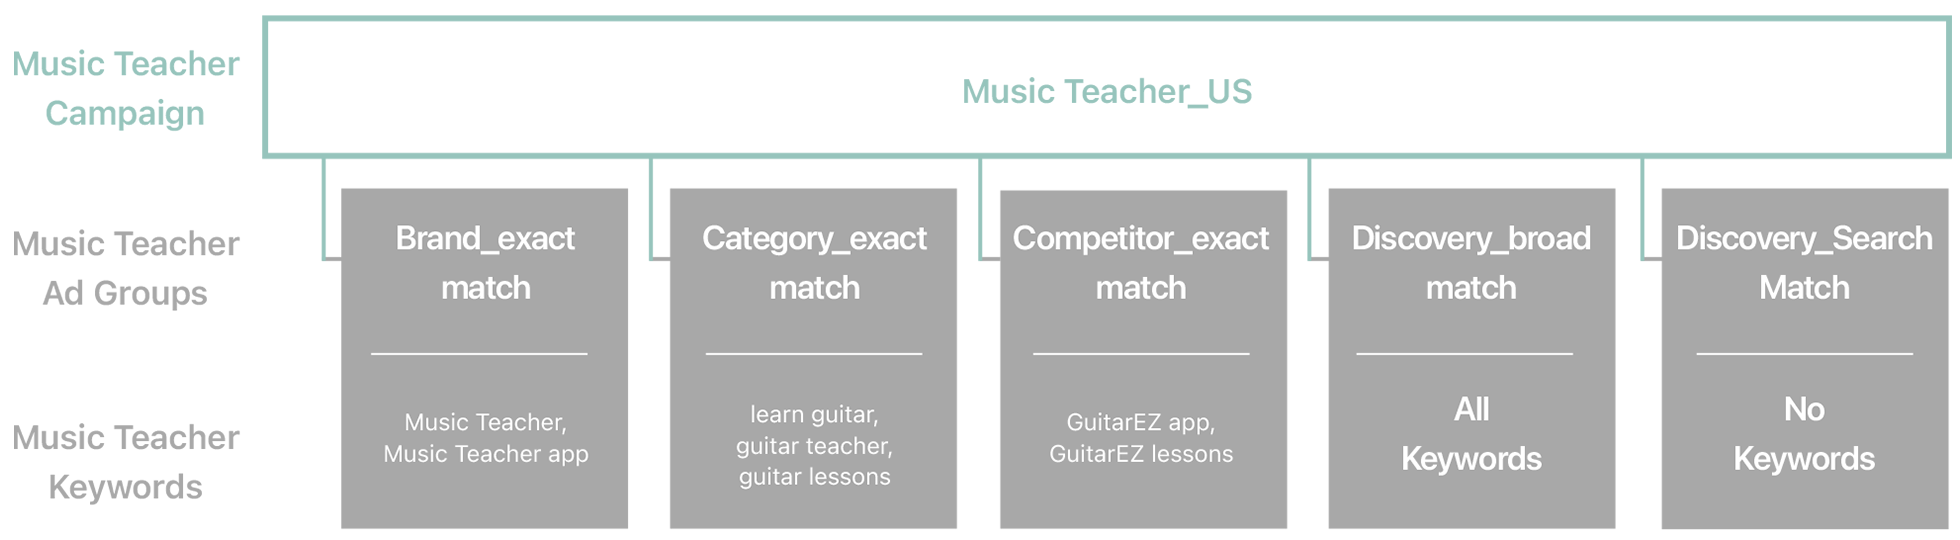 Diagram of campaign types and associated ad groups, and suggested keywords and tips for example app Music Teacher. 